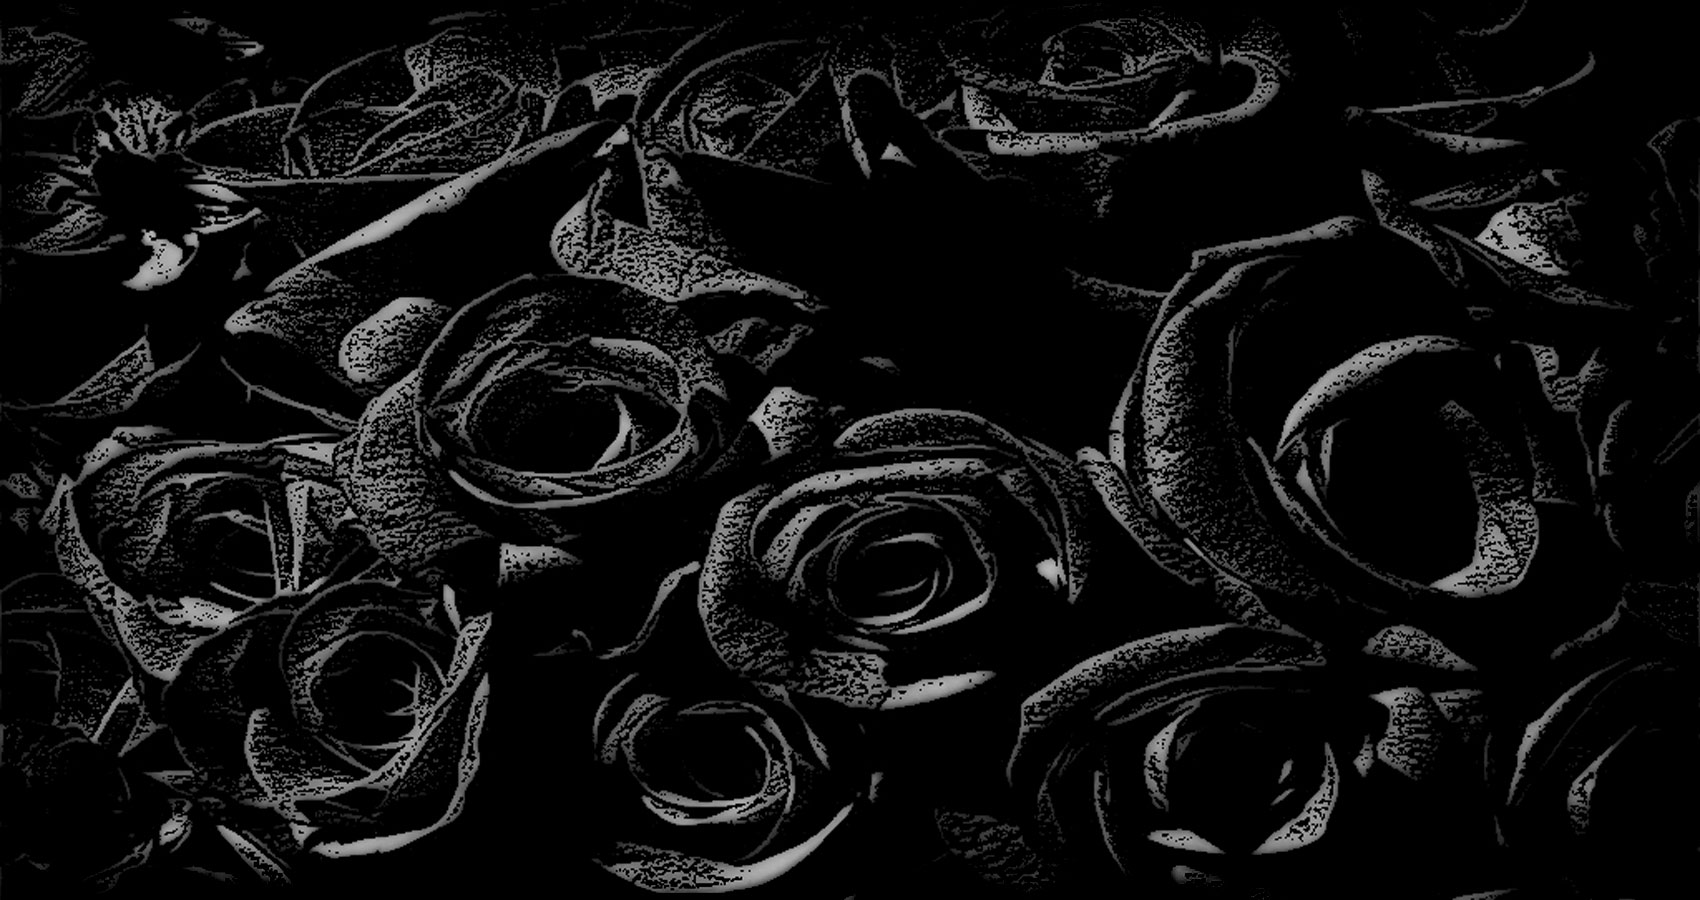 Black Roses written by Peter Owen at Spillwords.com